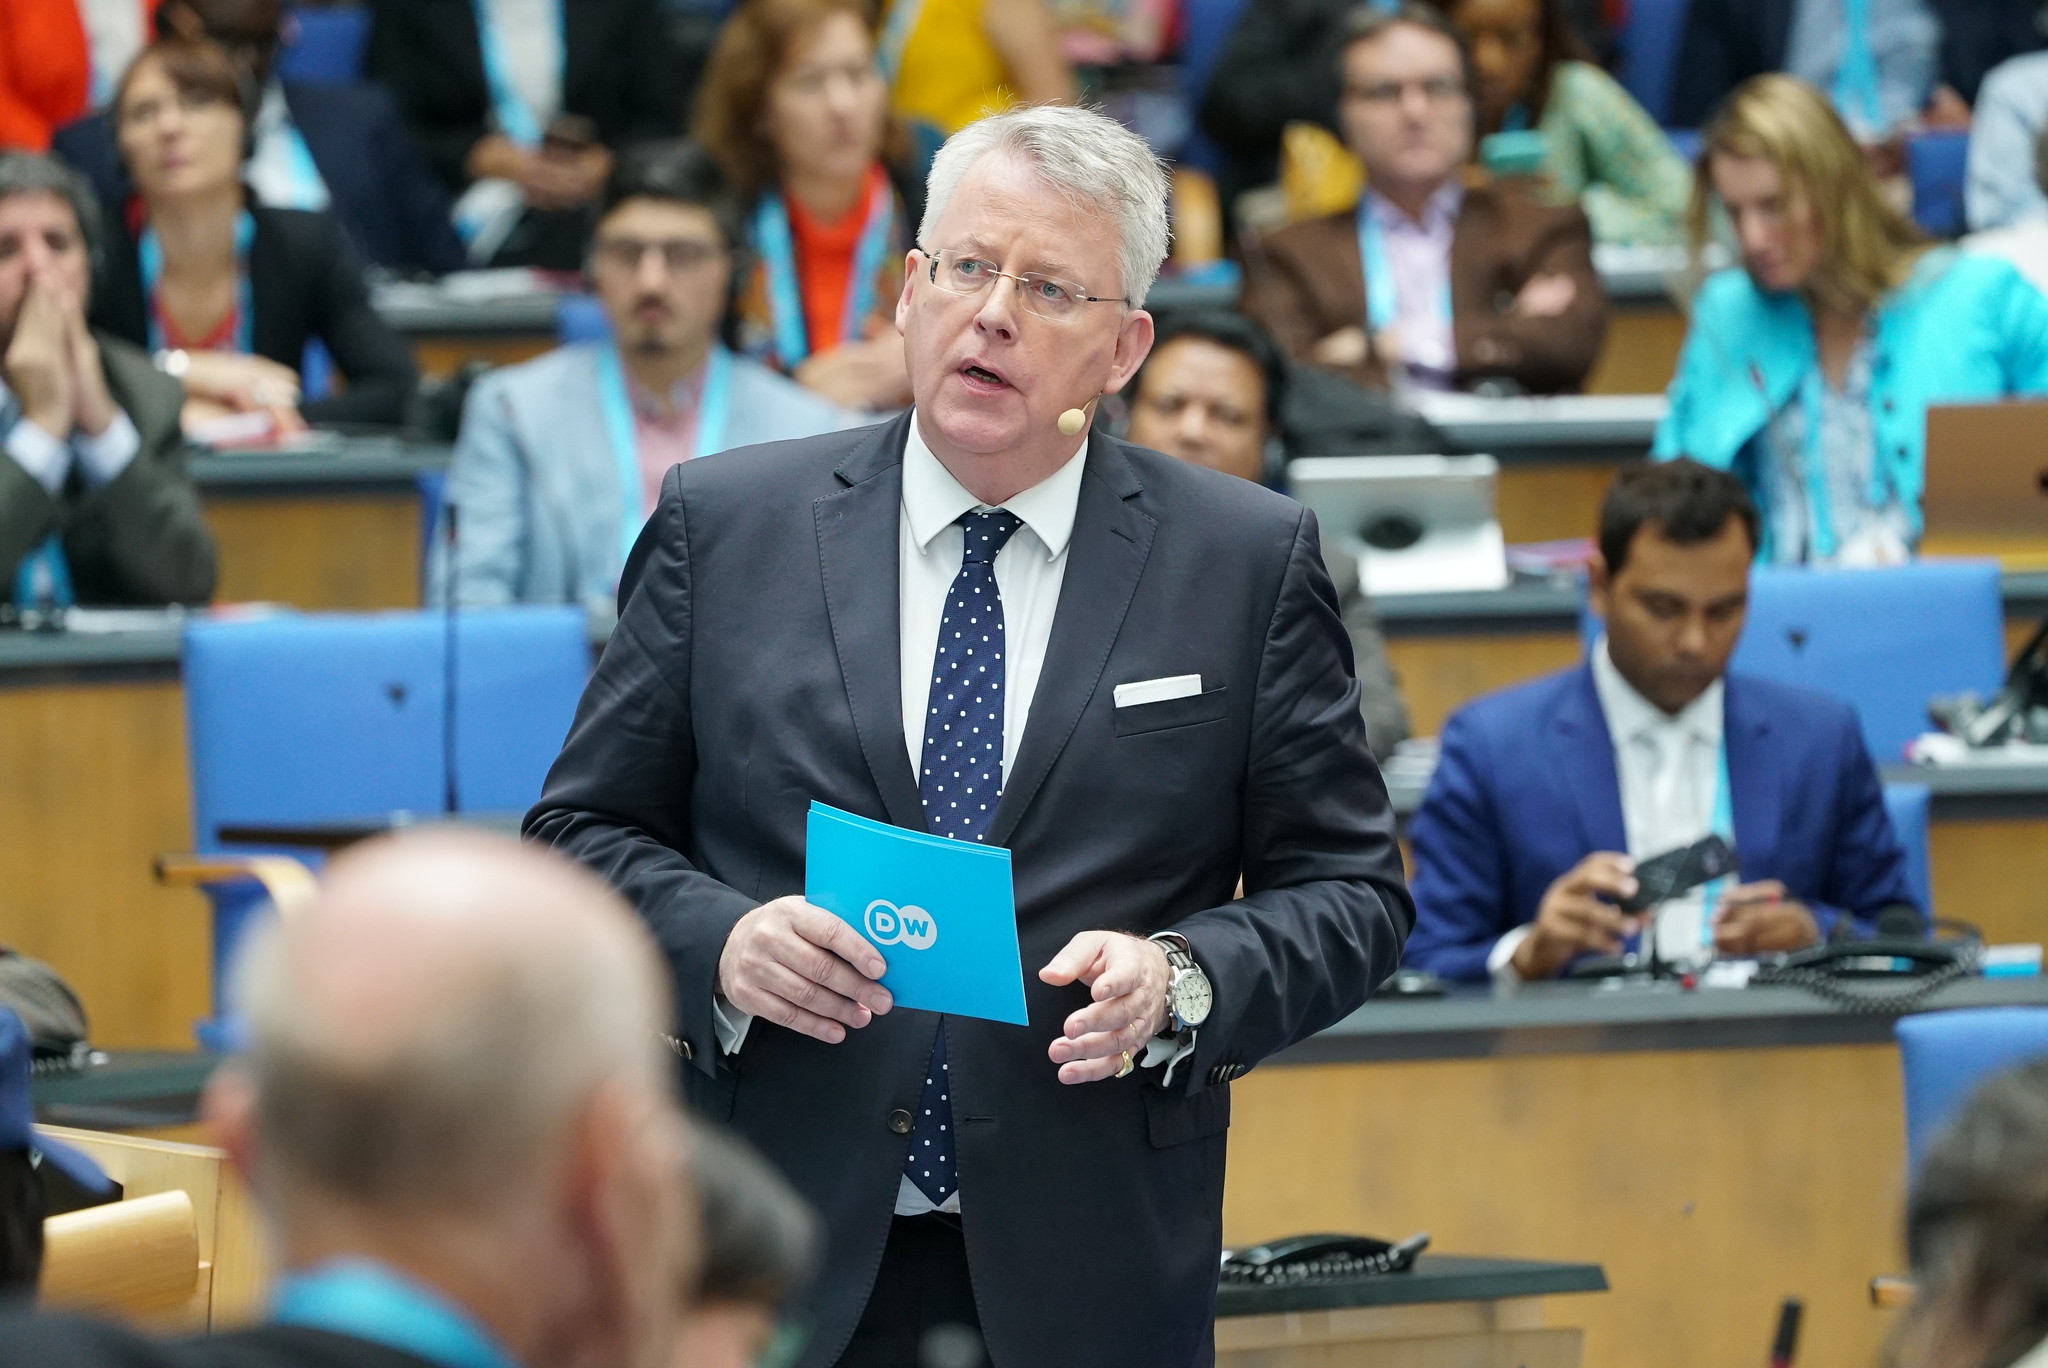 Peter Limbourg, Director General of Deutsche Welle, at the DW Global Media Forum 2019, May 27, 2019. (DW/P. Böll/CC BY-NC 2.0)